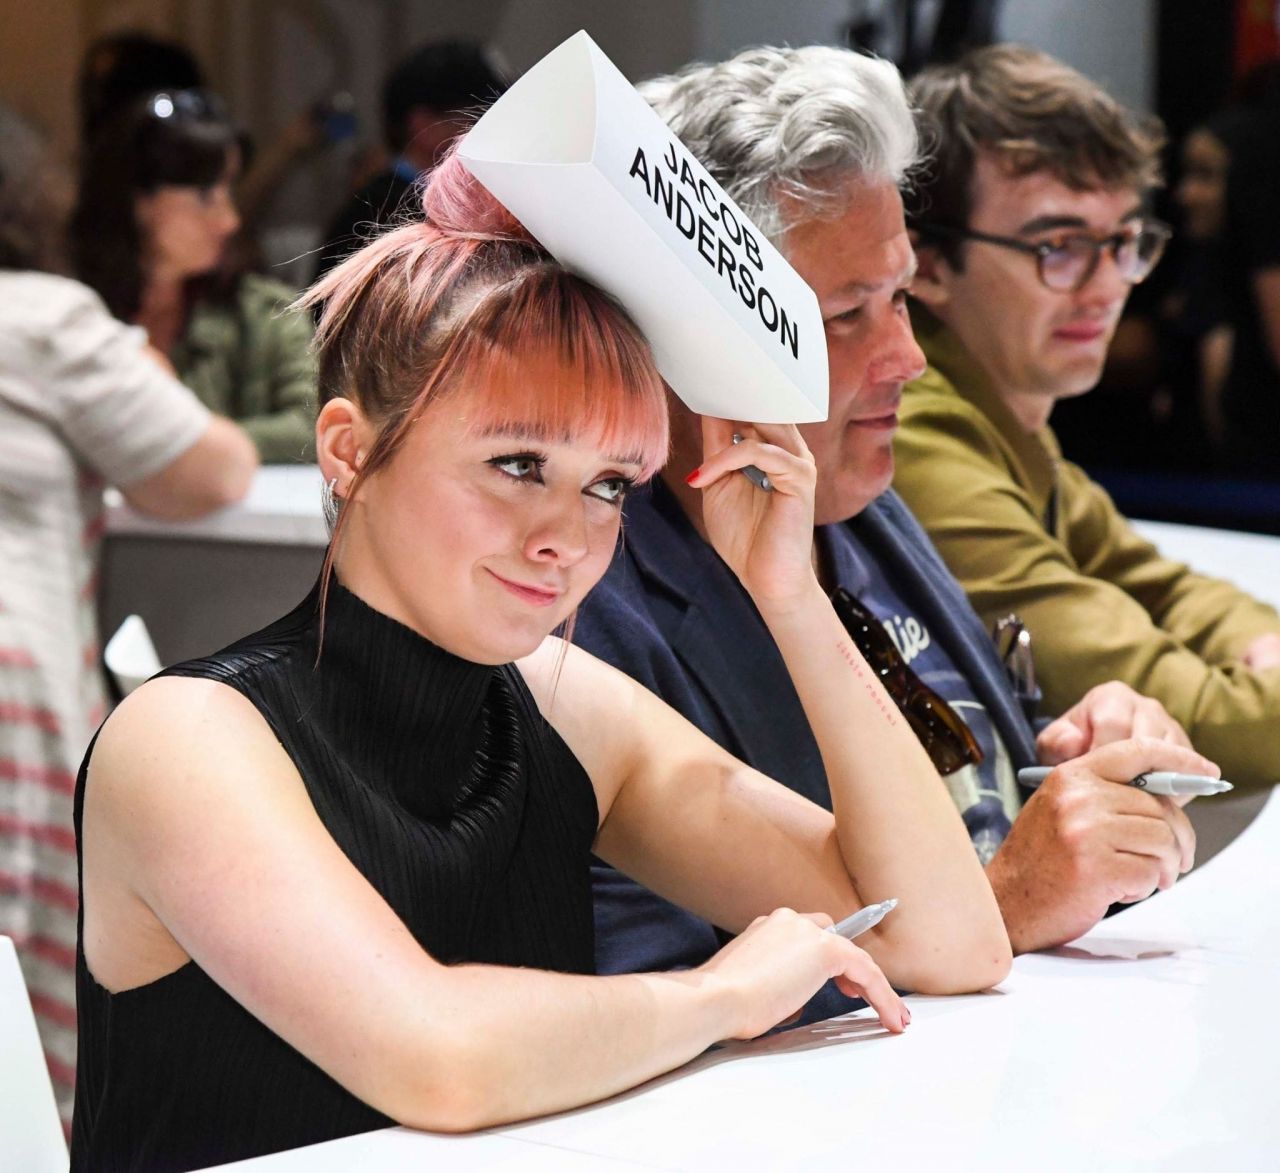 maisie-williams-game-of-thrones-cast-autograph-signing-at-sdcc-2019-3.jpg